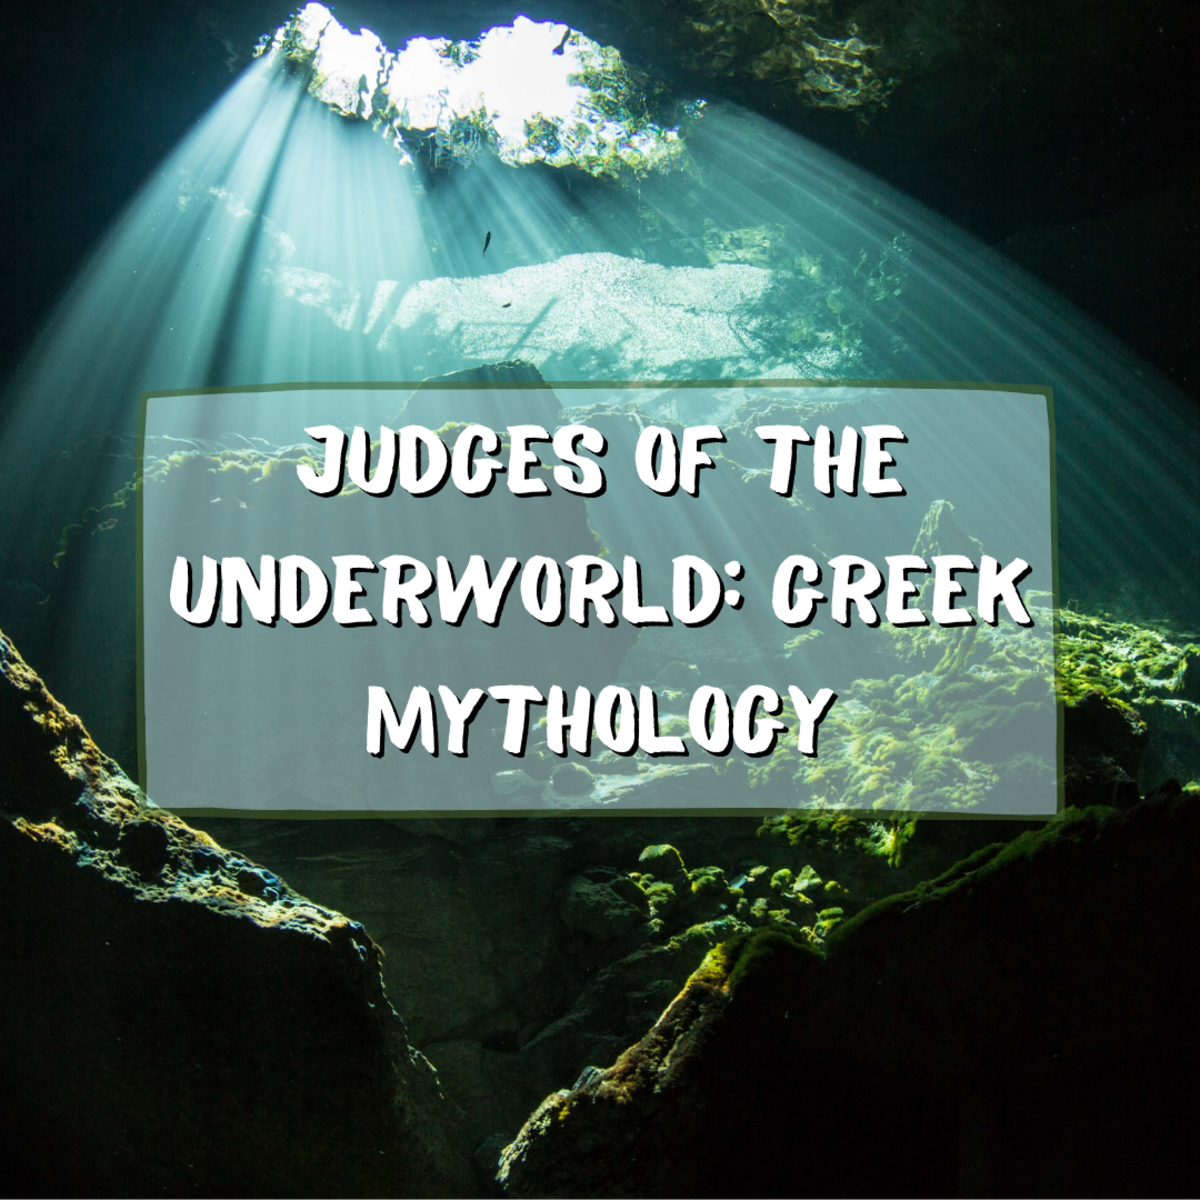 This article discusses the Greek concept of the afterlife and the three Judges of the Underworld.